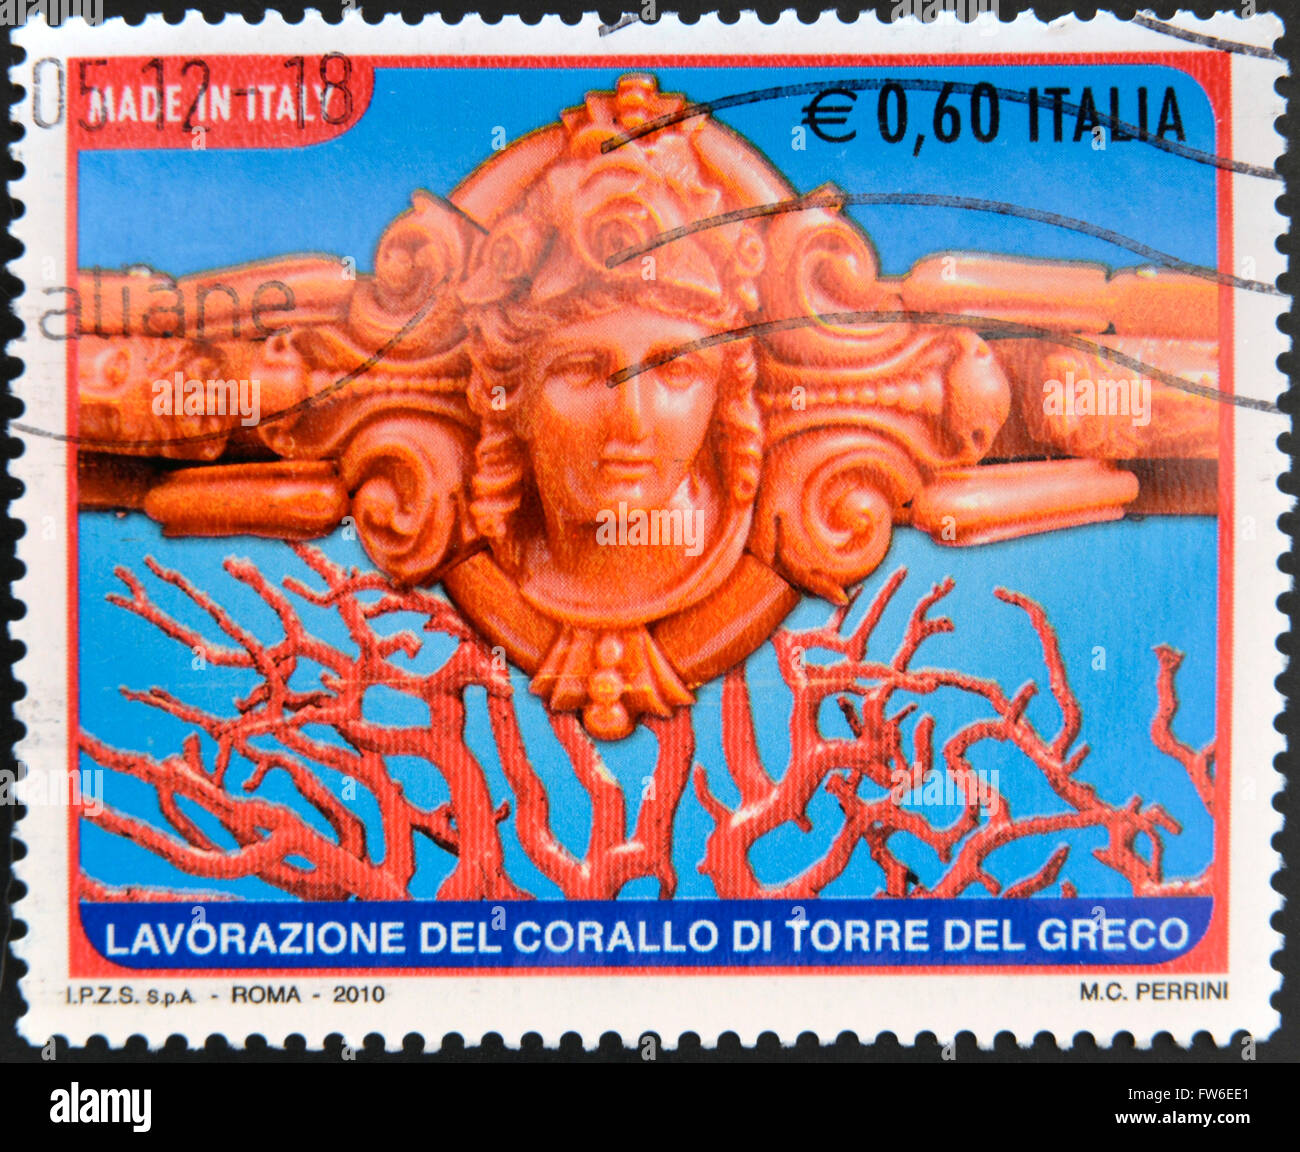 ITALY - CIRCA 2010: A stamp printed in Italy shows crafts Coral Tower of the Greek, circa 2010 Stock Photo